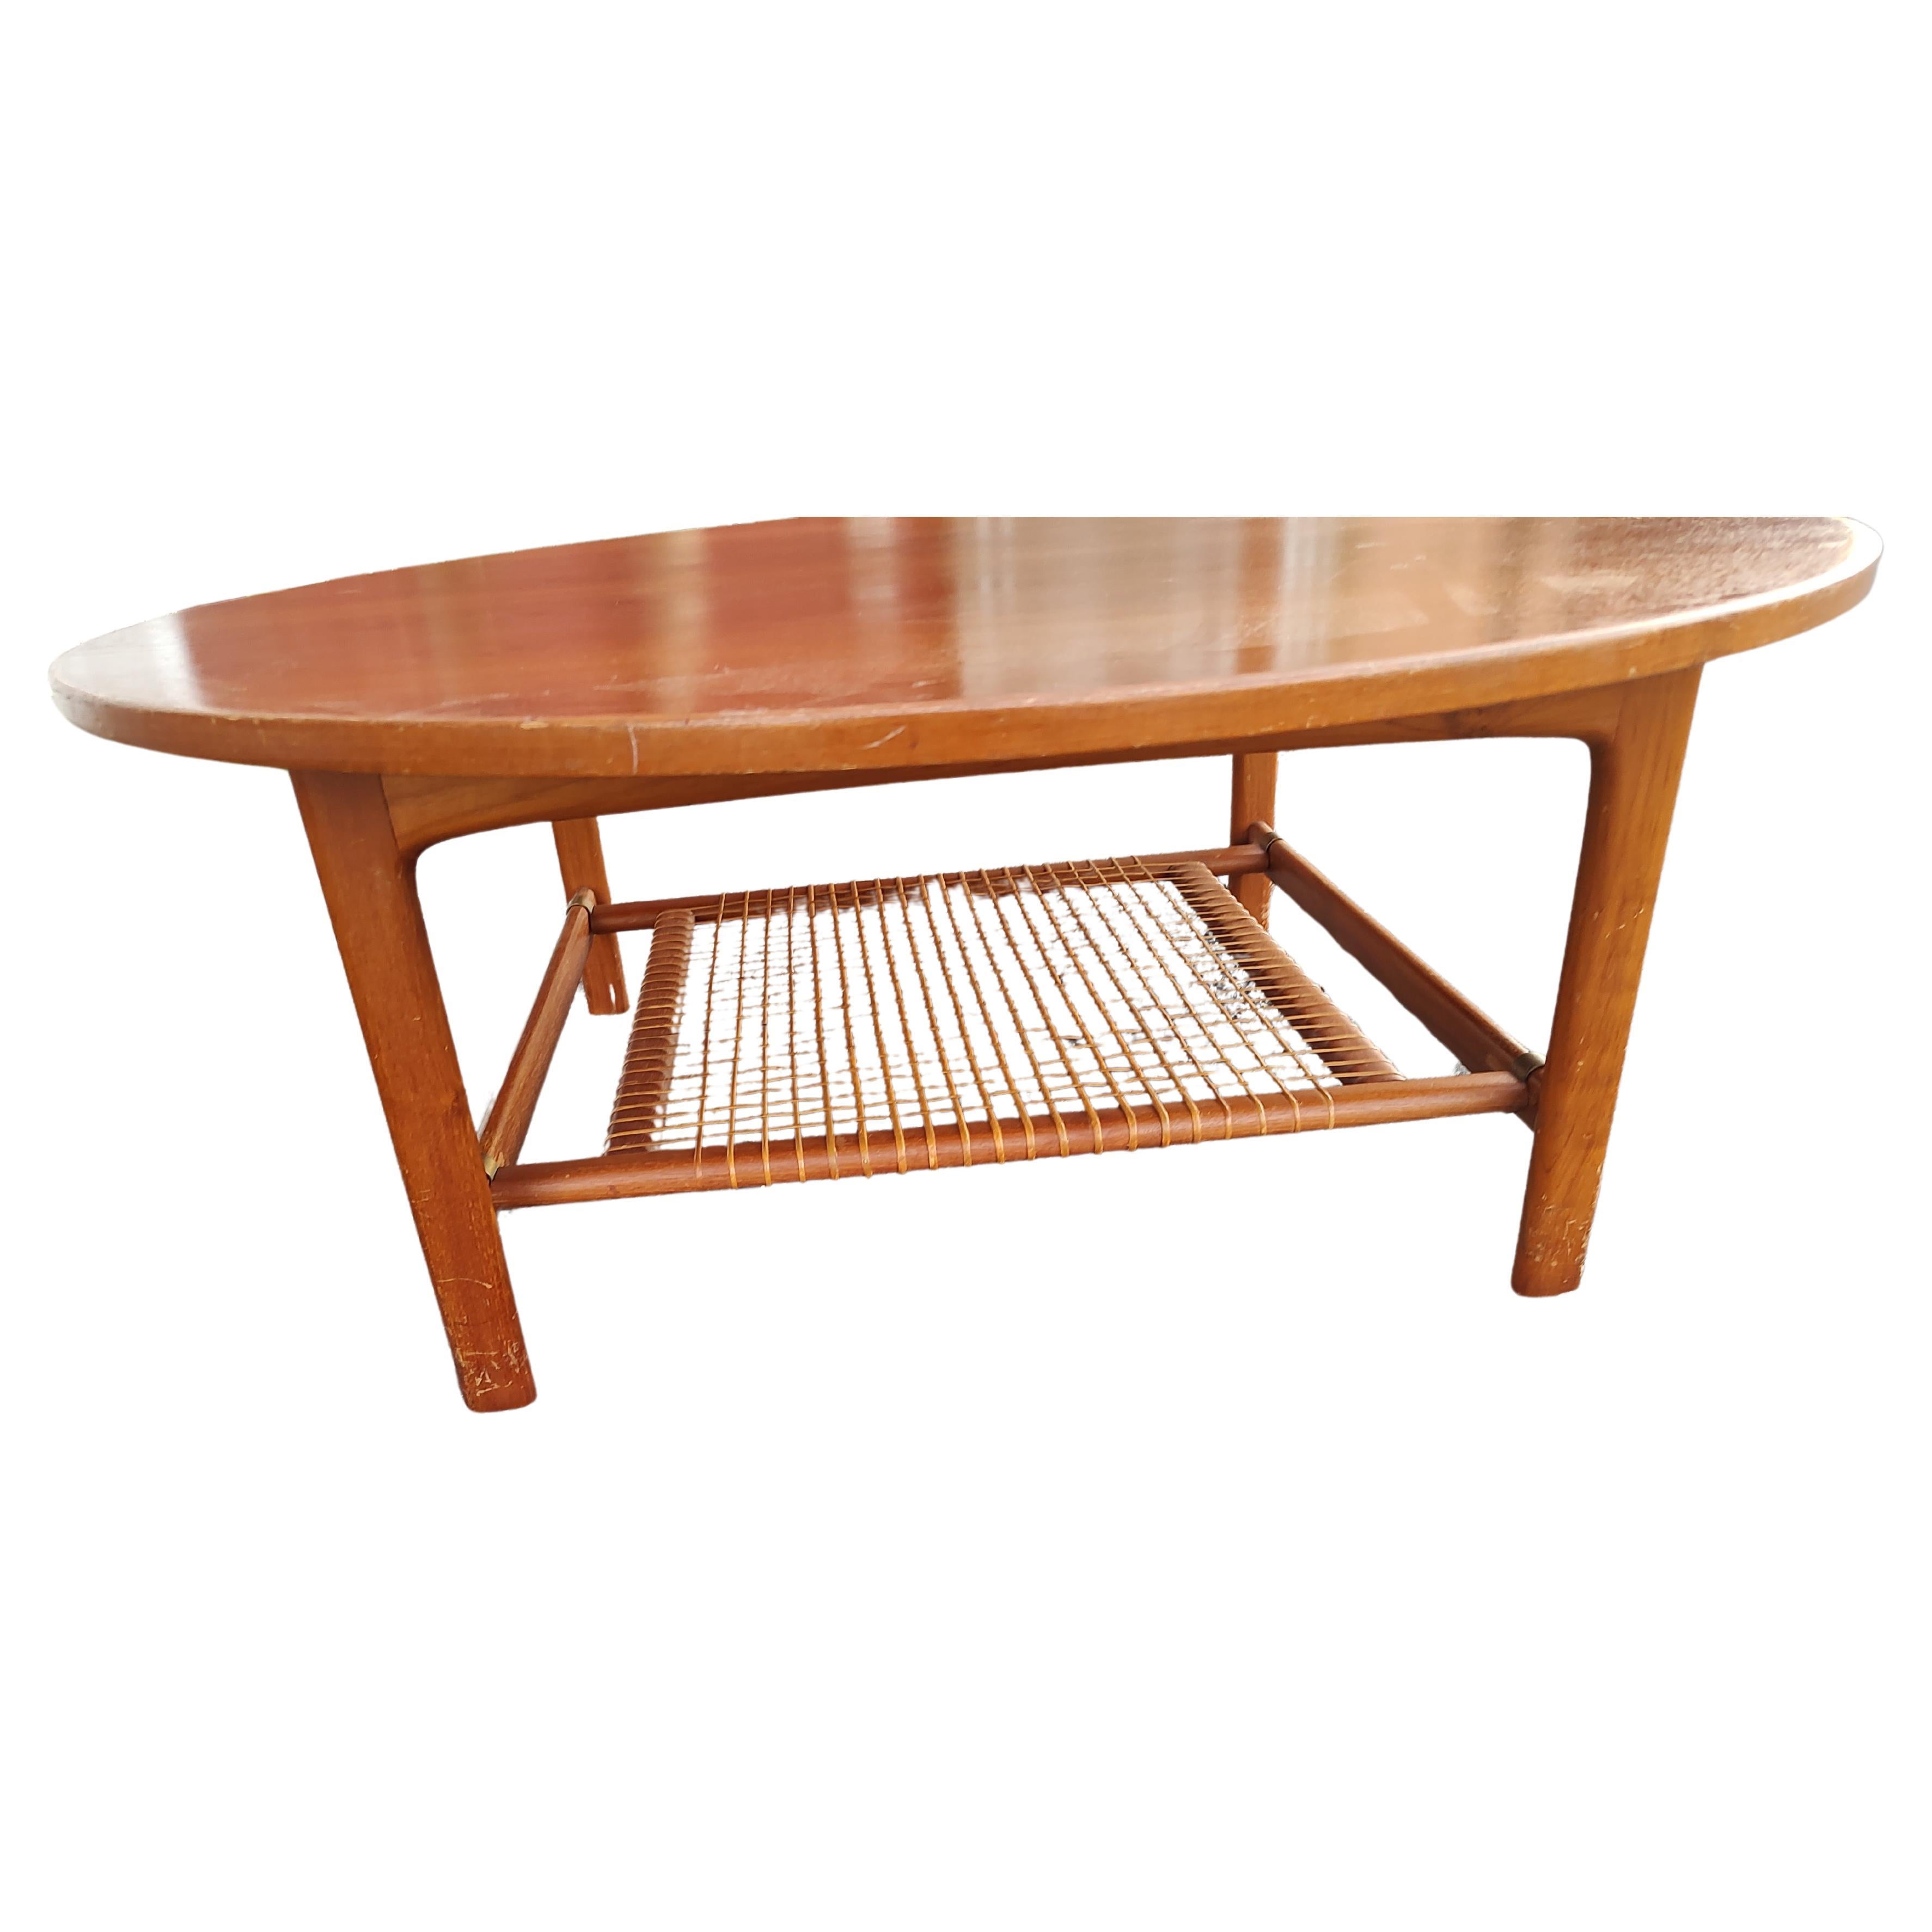 Swedish Mid-Century Modern Teak with Woven Shelf Cocktail Table by Dux Sweden - Restored For Sale